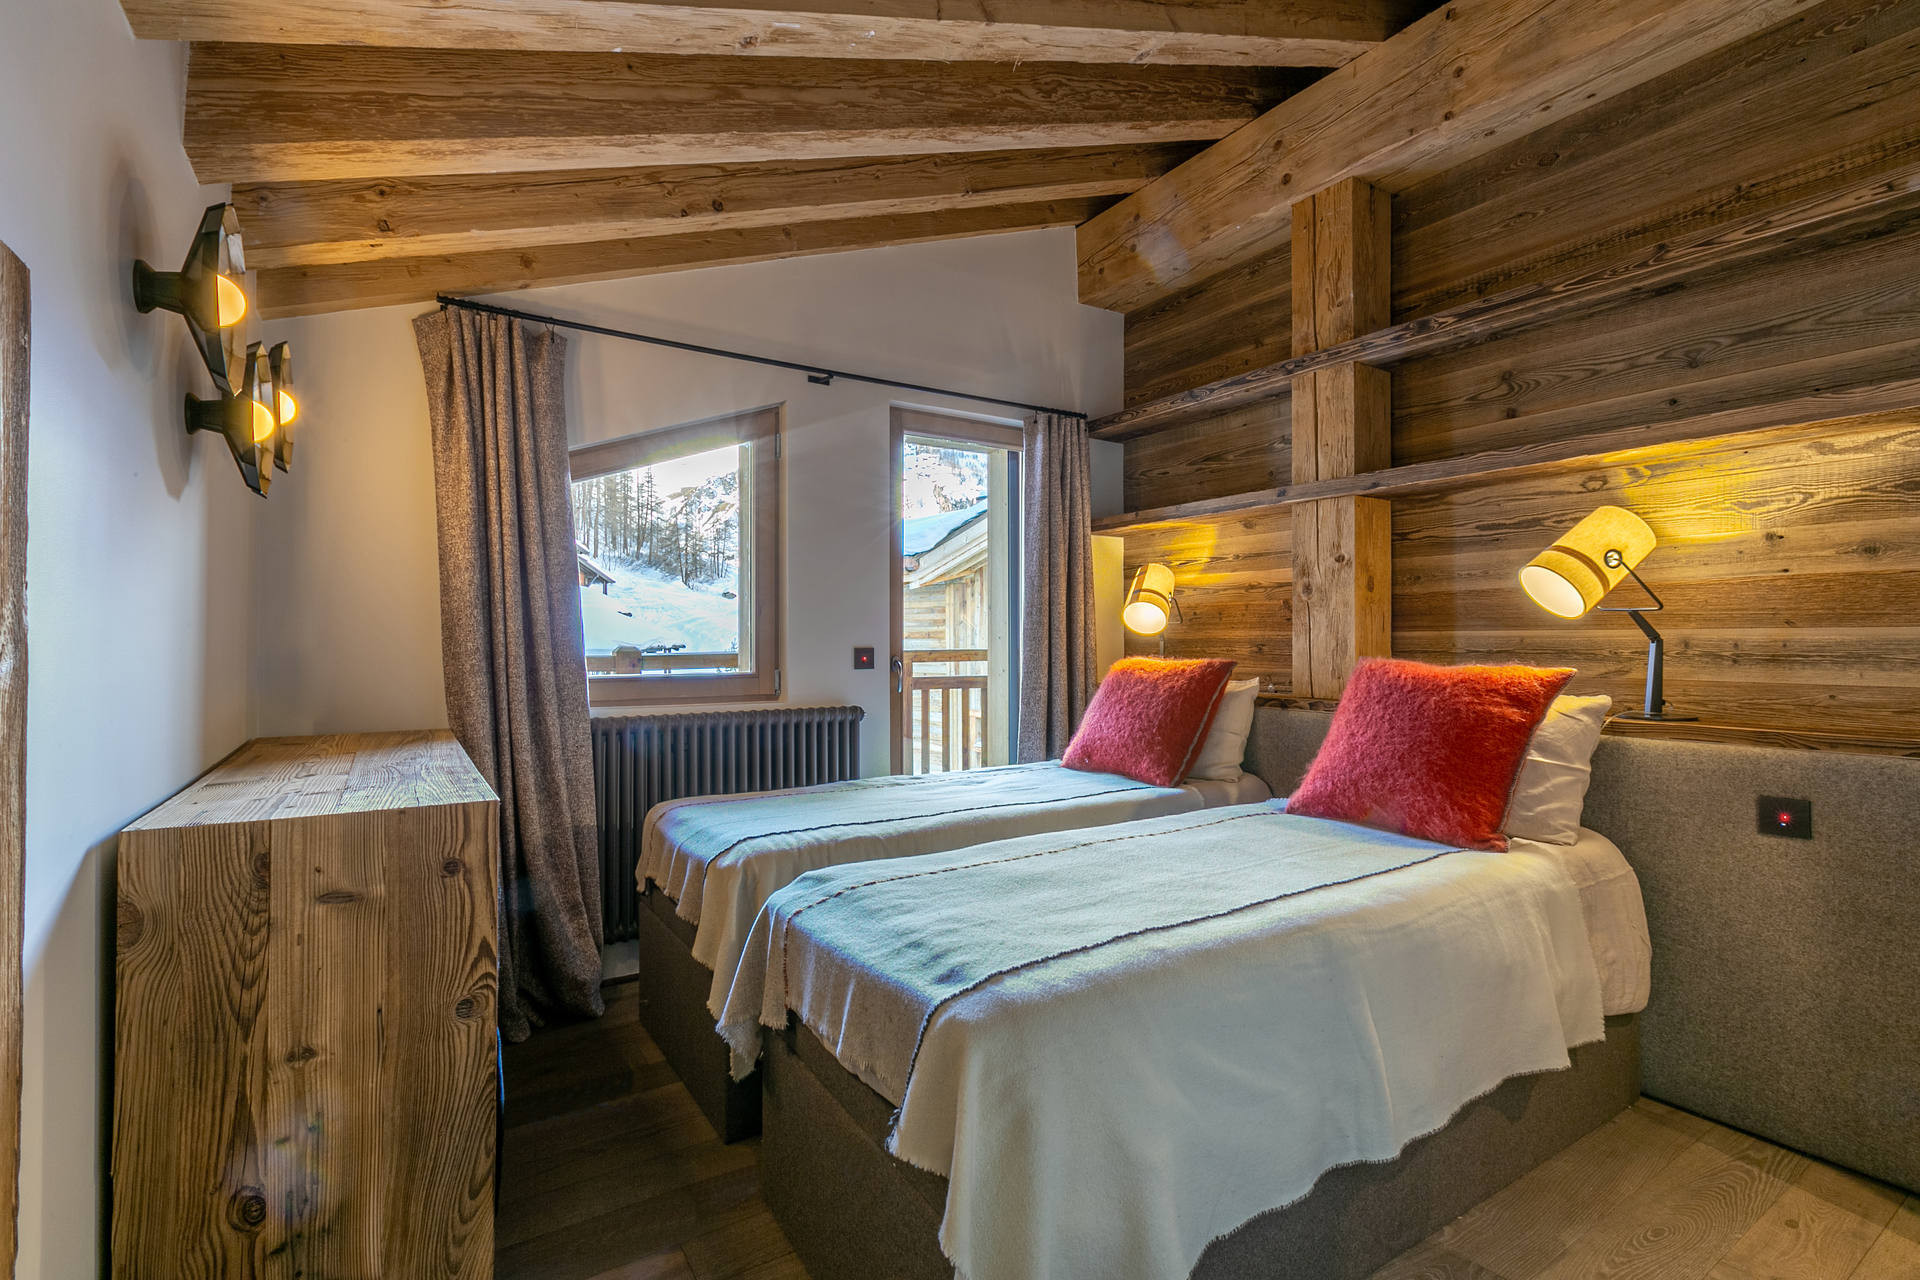 val-d-isere-location-appartement-luxe-variscite